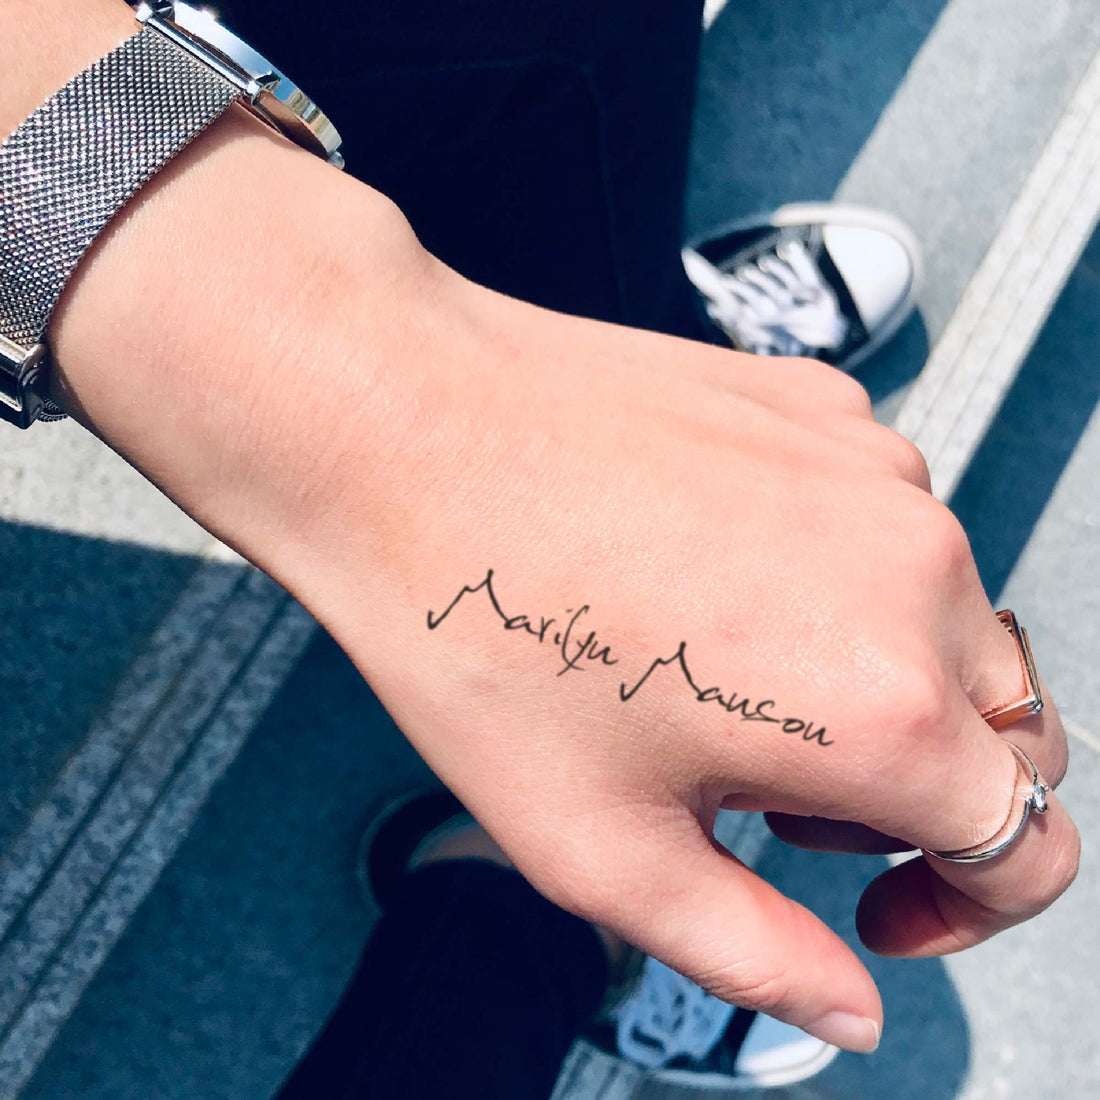 Marilyn Manson custom temporary tattoo sticker design idea inspiration meanings removal arm wrist hand words font name signature calligraphy lyrics tour concert outfits merch accessory gift souvenir costumes wear dress up code